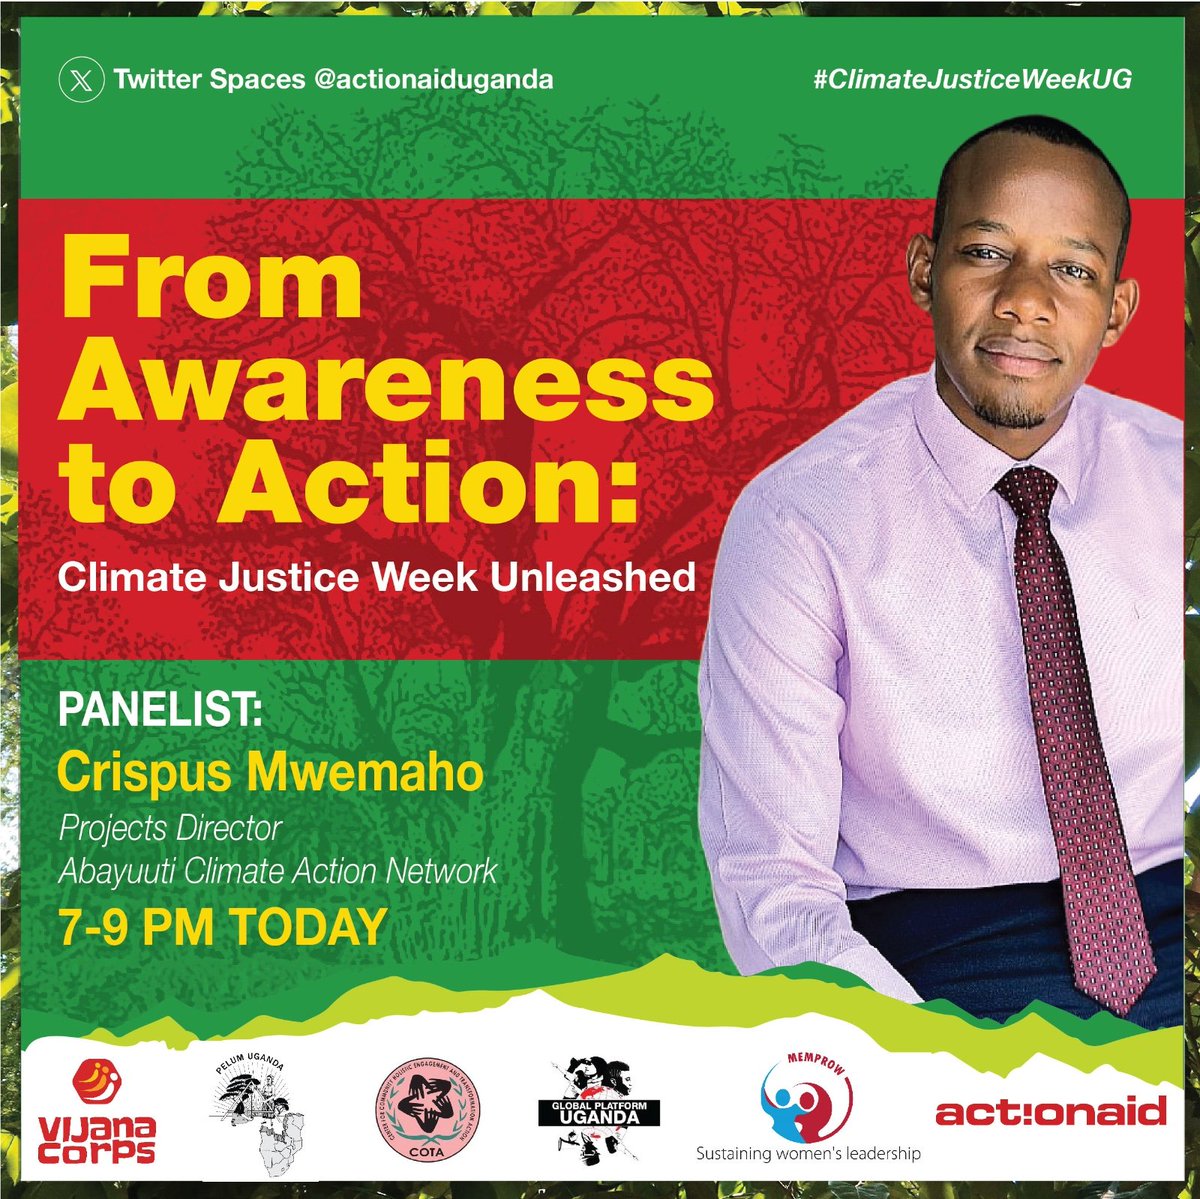 Join our Climate Justice Week of Action #XSpace today featuring @CrispusMwemaho a co-founder of Abayuuti Climate Action Network and a trained youth climate negotiator, Crispus is passionate about adaptation and loss and damage negotiations. #ClimateJusticeUG #FundOurFuture